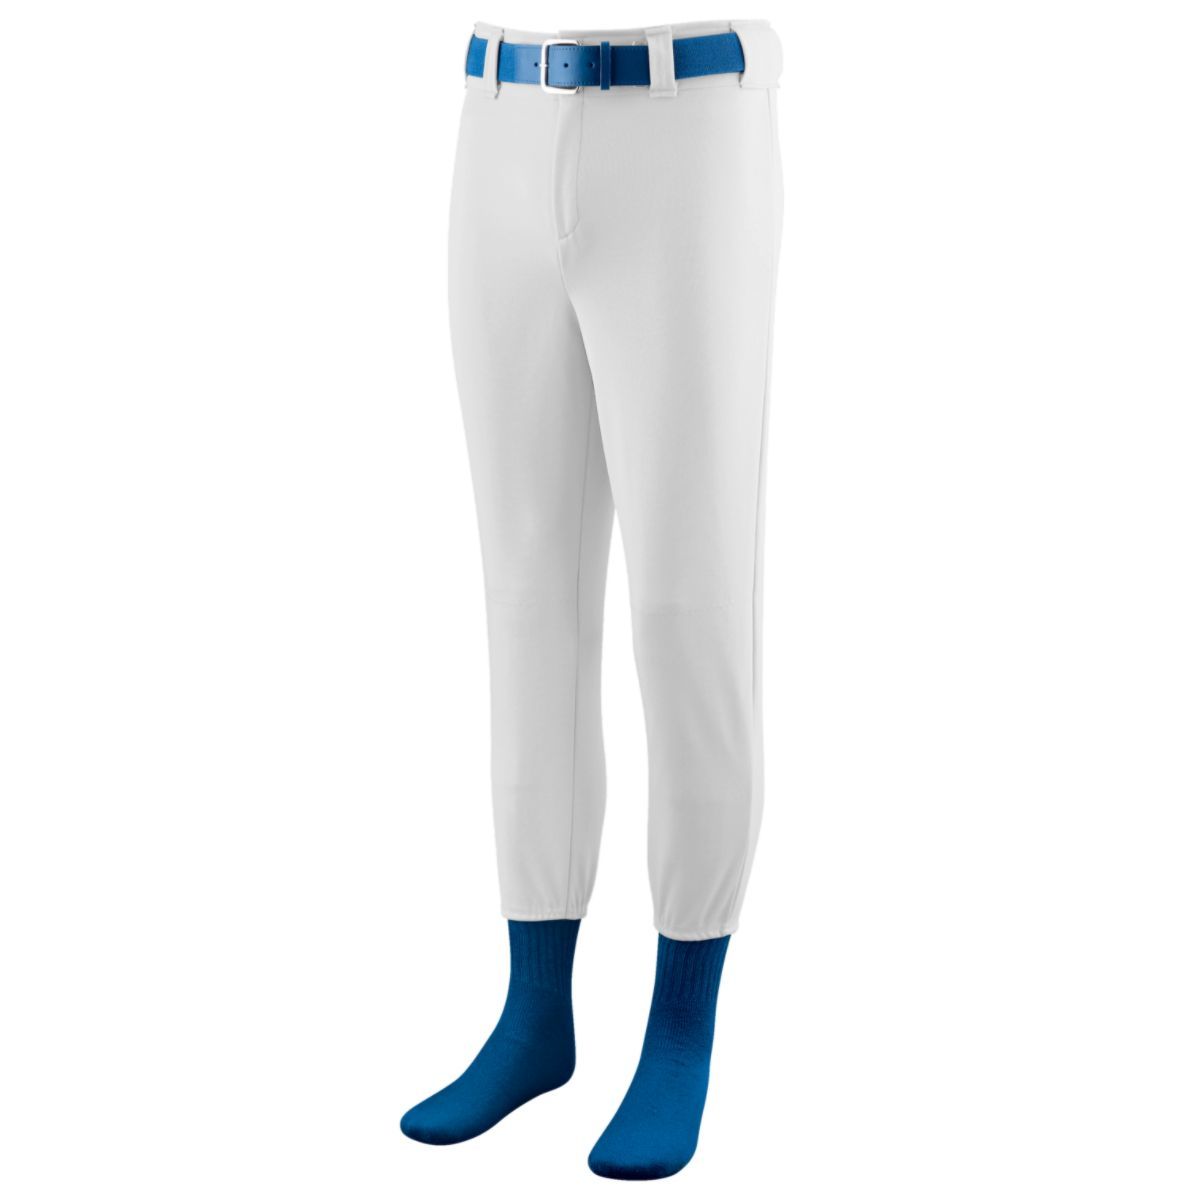 Augusta Sportswear Softball/Baseball Pant in White  -Part of the Adult, Adult-Pants, Pants, Augusta-Products, Softball product lines at KanaleyCreations.com